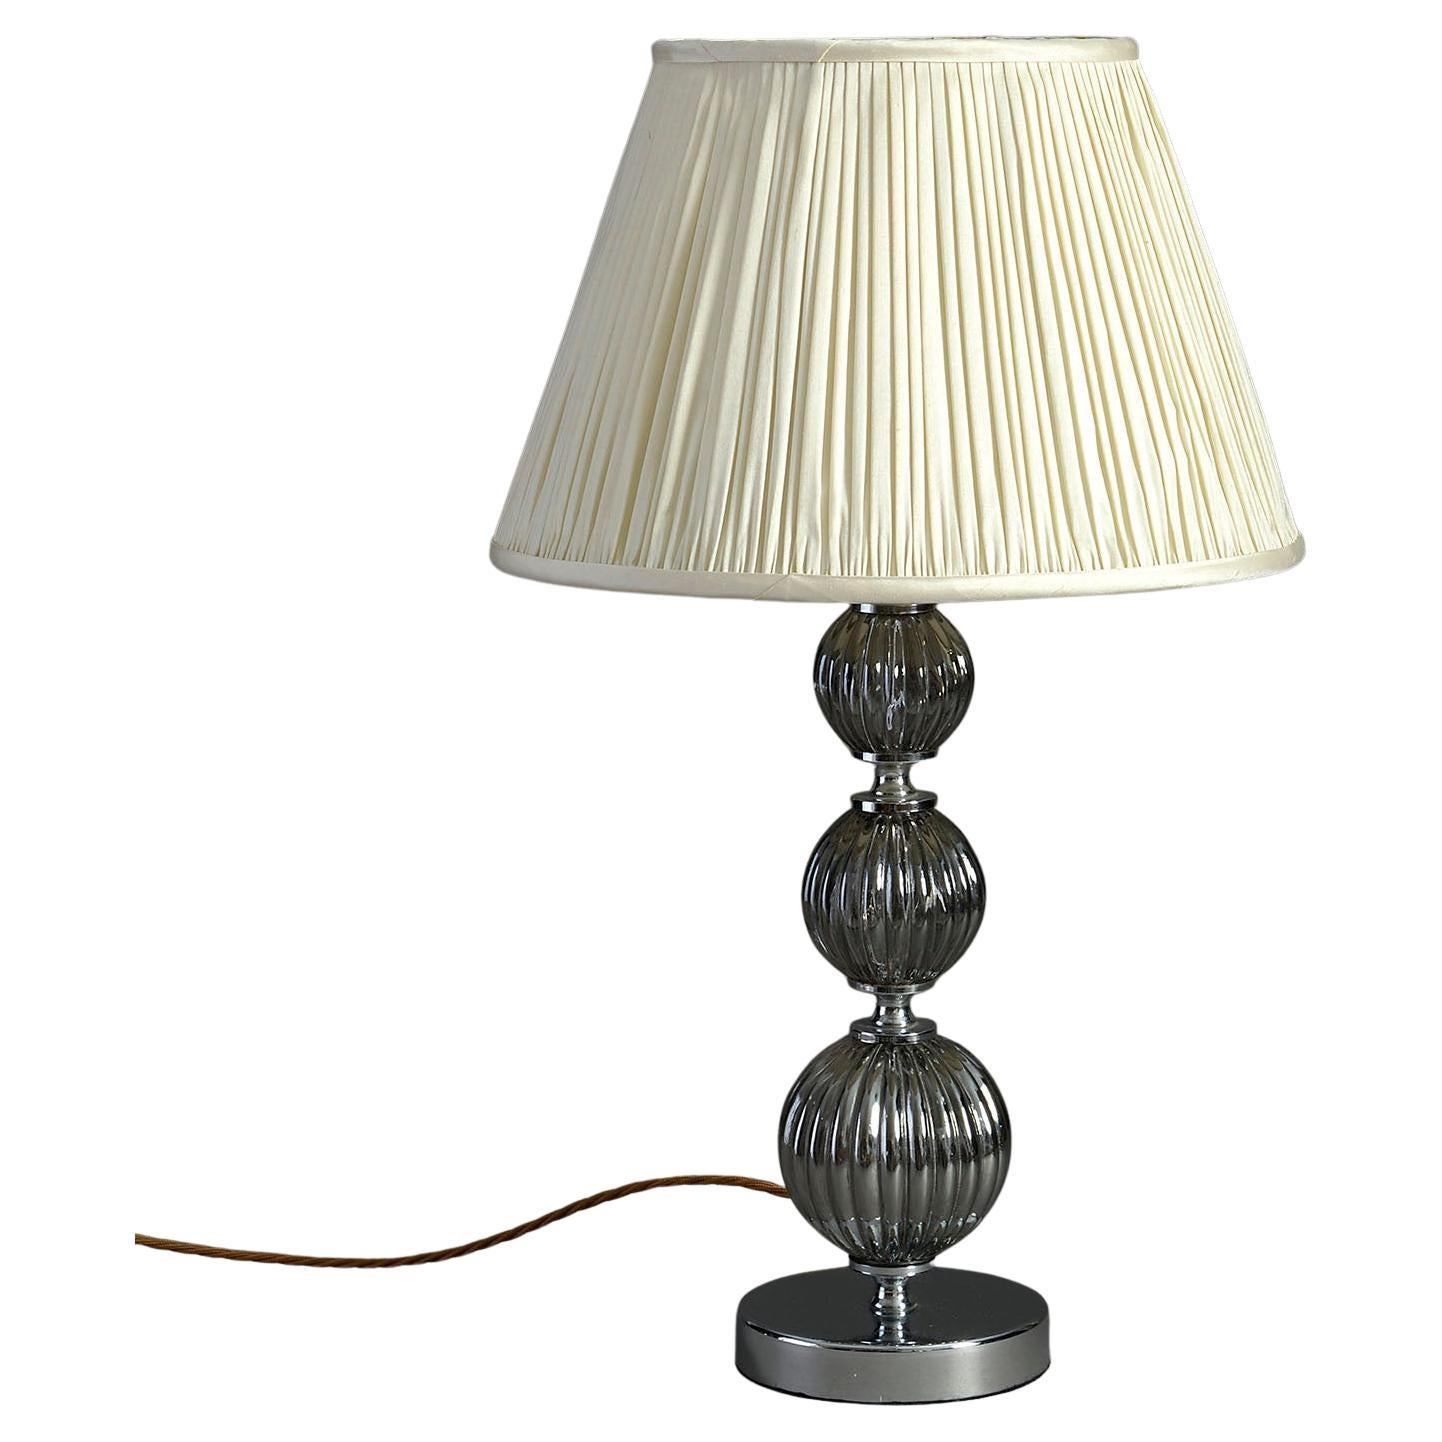 Mid-20th Century Modernist Glass & Chrome Table Lamp For Sale